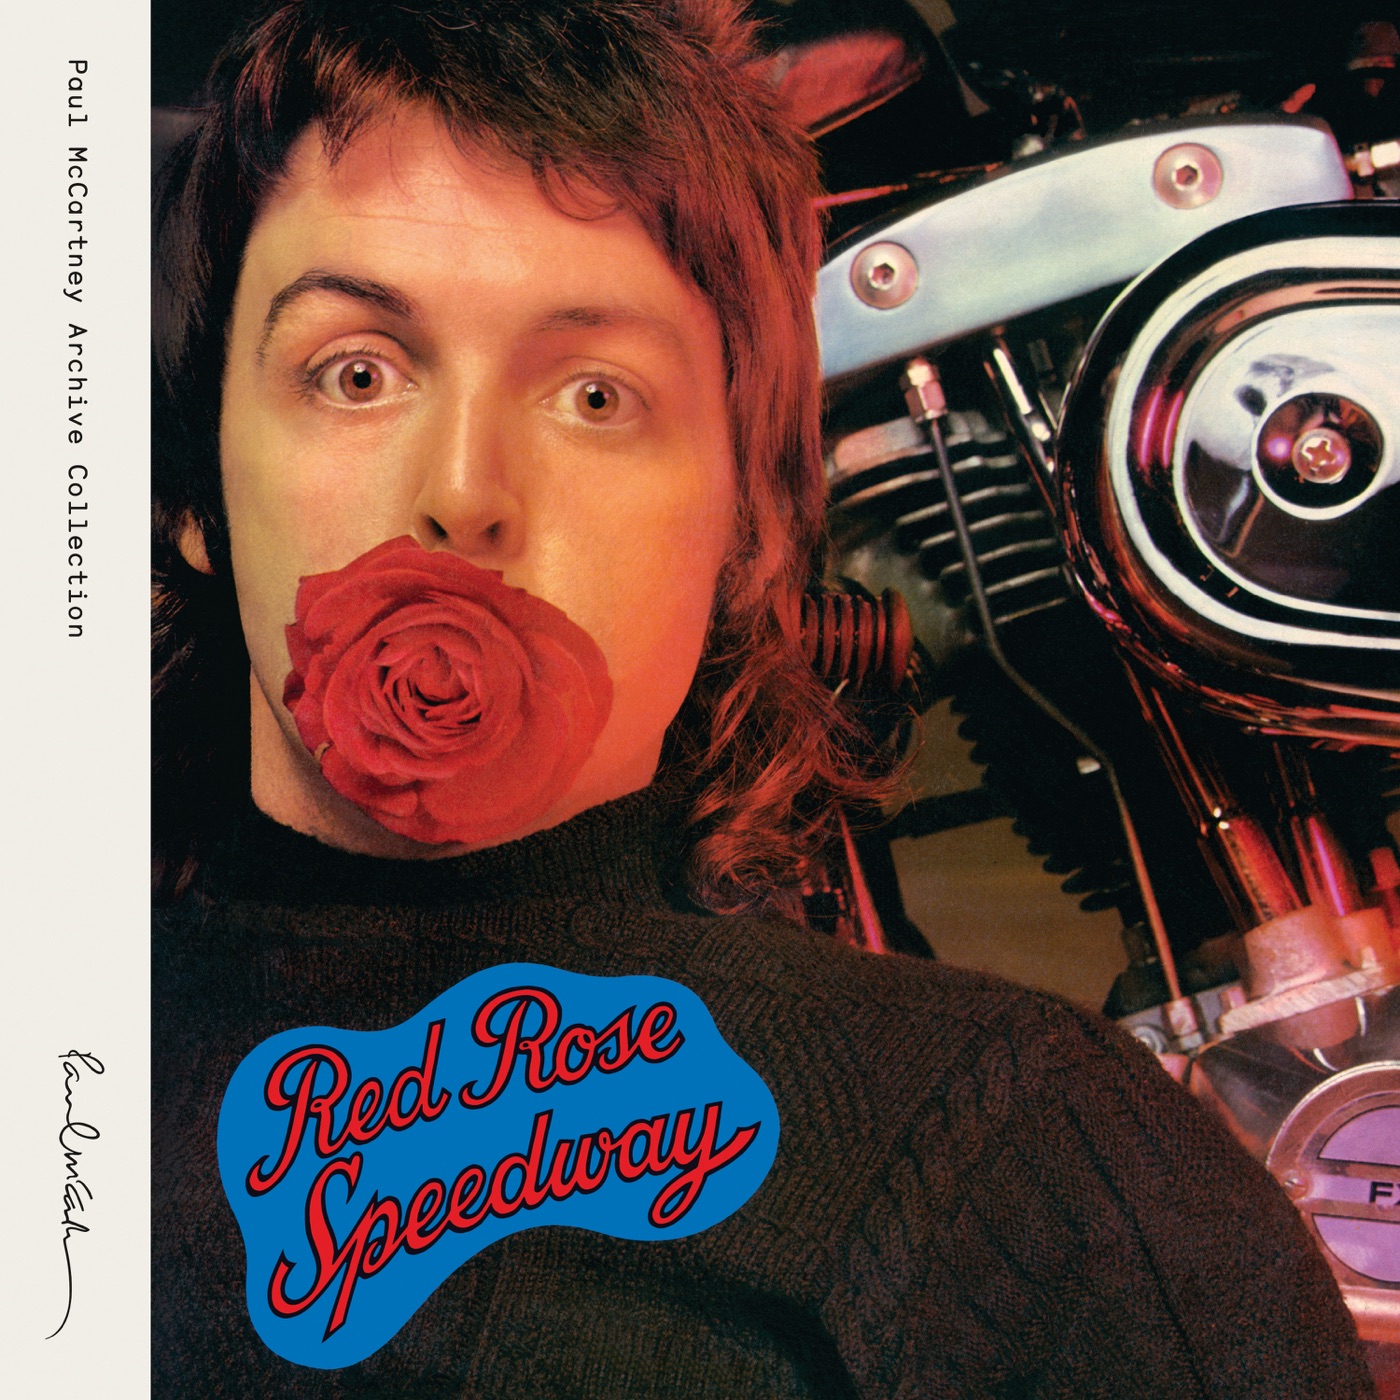 Red Rose Speedway (Archive Collection) by Paul McCartney & Wings, Wings, Paul McCartney